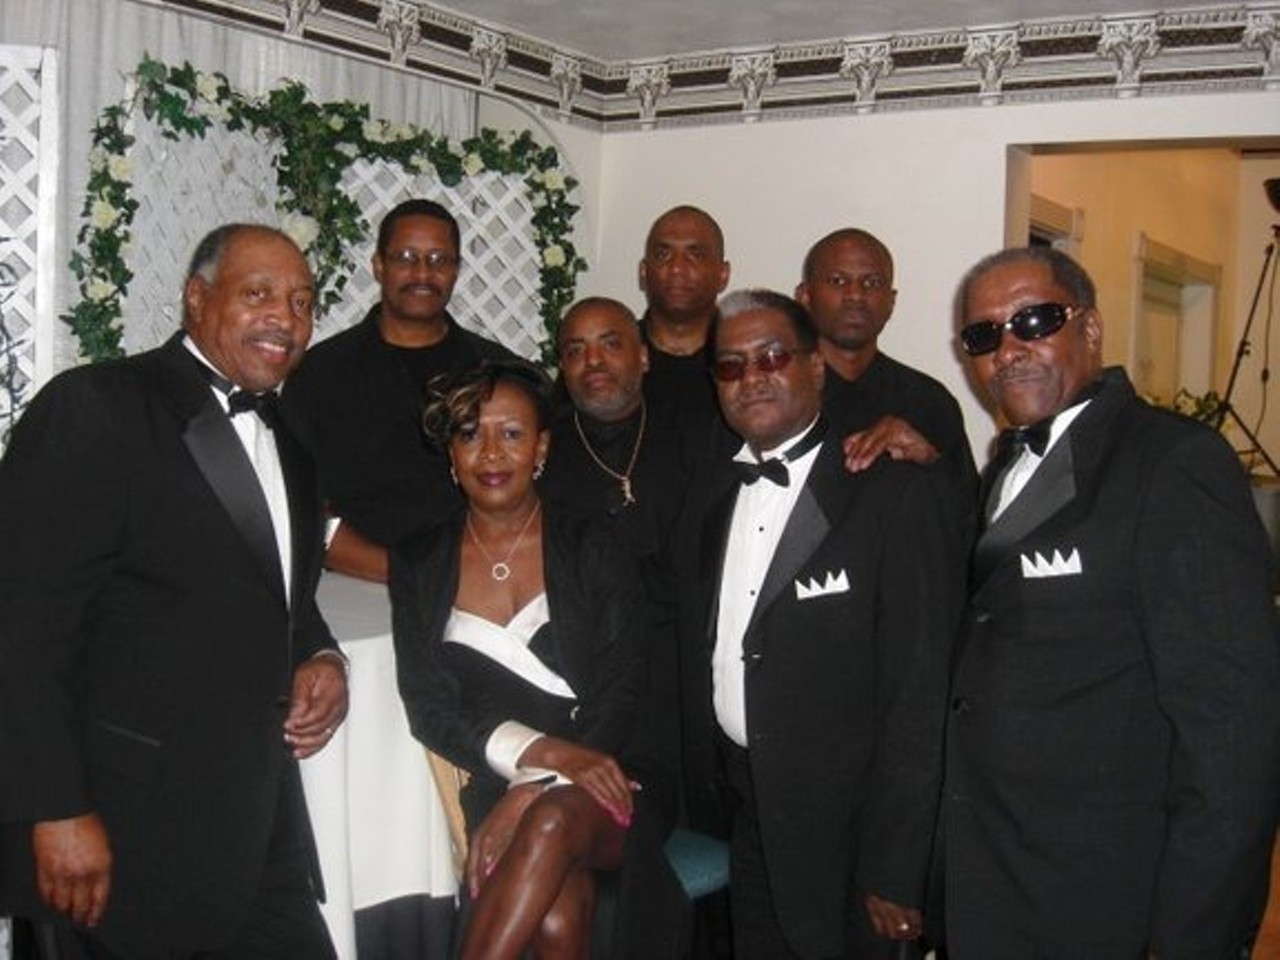 Back in 2006, then-Rock and Roll Hall of Fame and Museum CEO Terry Stewart asked the Hesitations, a terrific old Cleveland soul group, to reunite for a gig at the museum. The band’s been playing steadily ever since and sounds as sharp as ever. The Hesitations' roots go back to the mid-'60s, when they recorded R&B hits like "Soul Superman," "Born Free," and "Climb Every Mountain." In their heyday, they mixed up R&B, gospel and soul and still take that approach. They don't play out much anymore so catching this show at the Beachland should be a real treat. (Niesel)